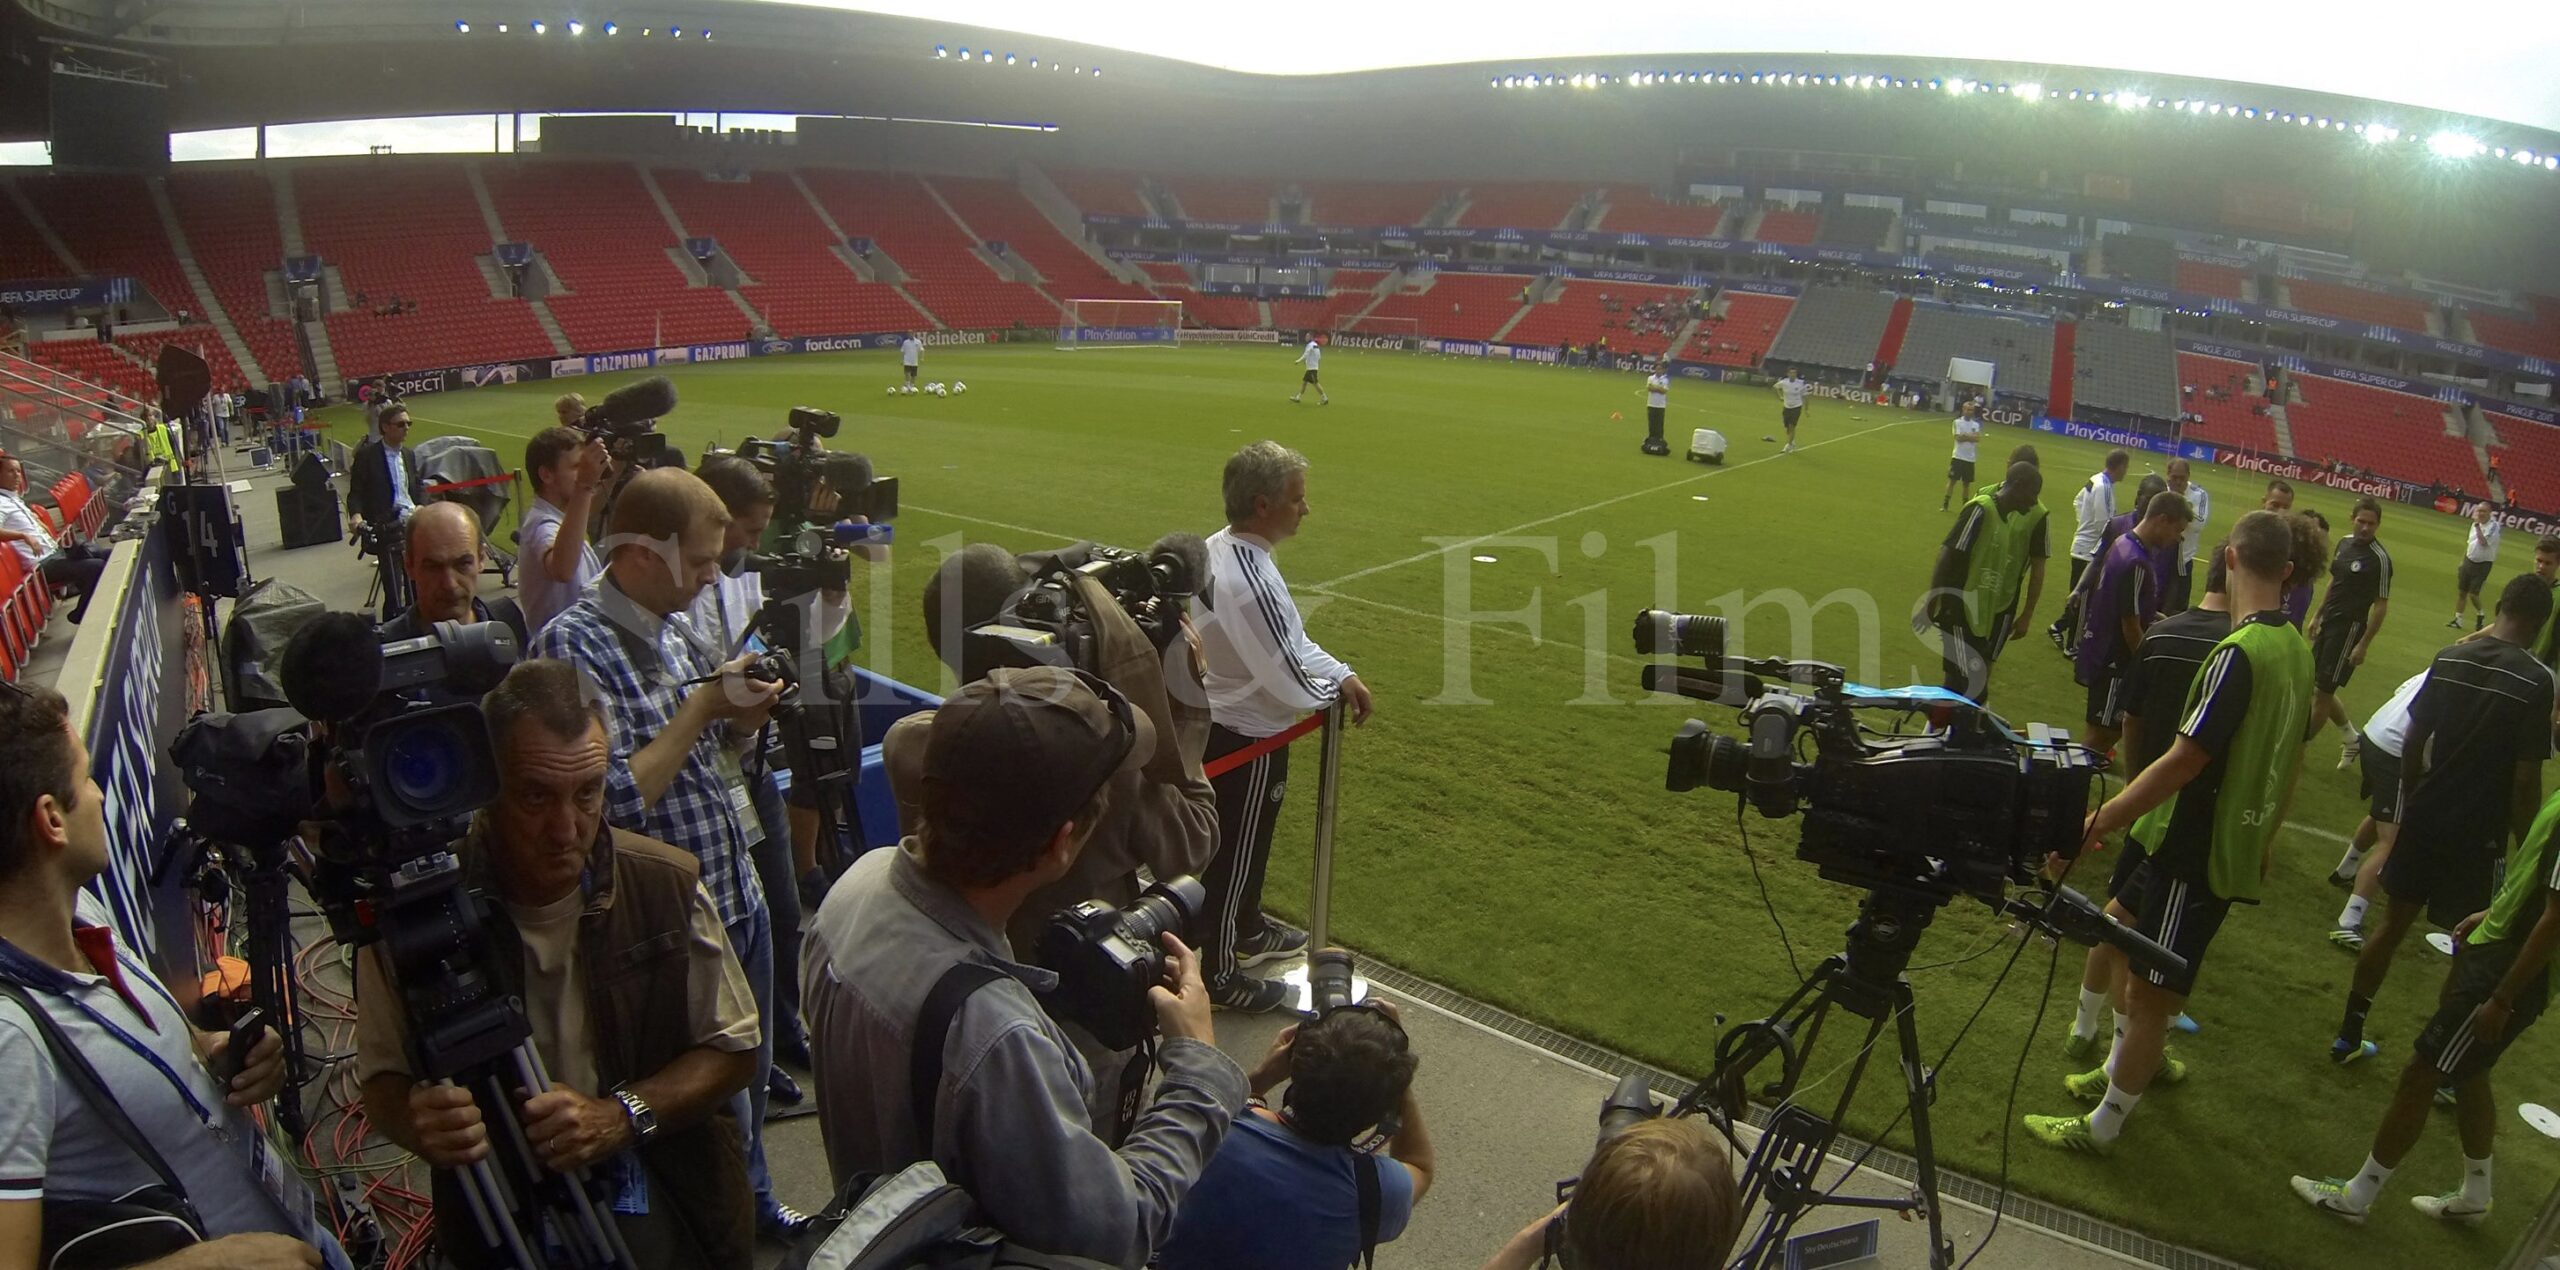 We offer video crews with LiveU 300 S live IP devices in Warsaw